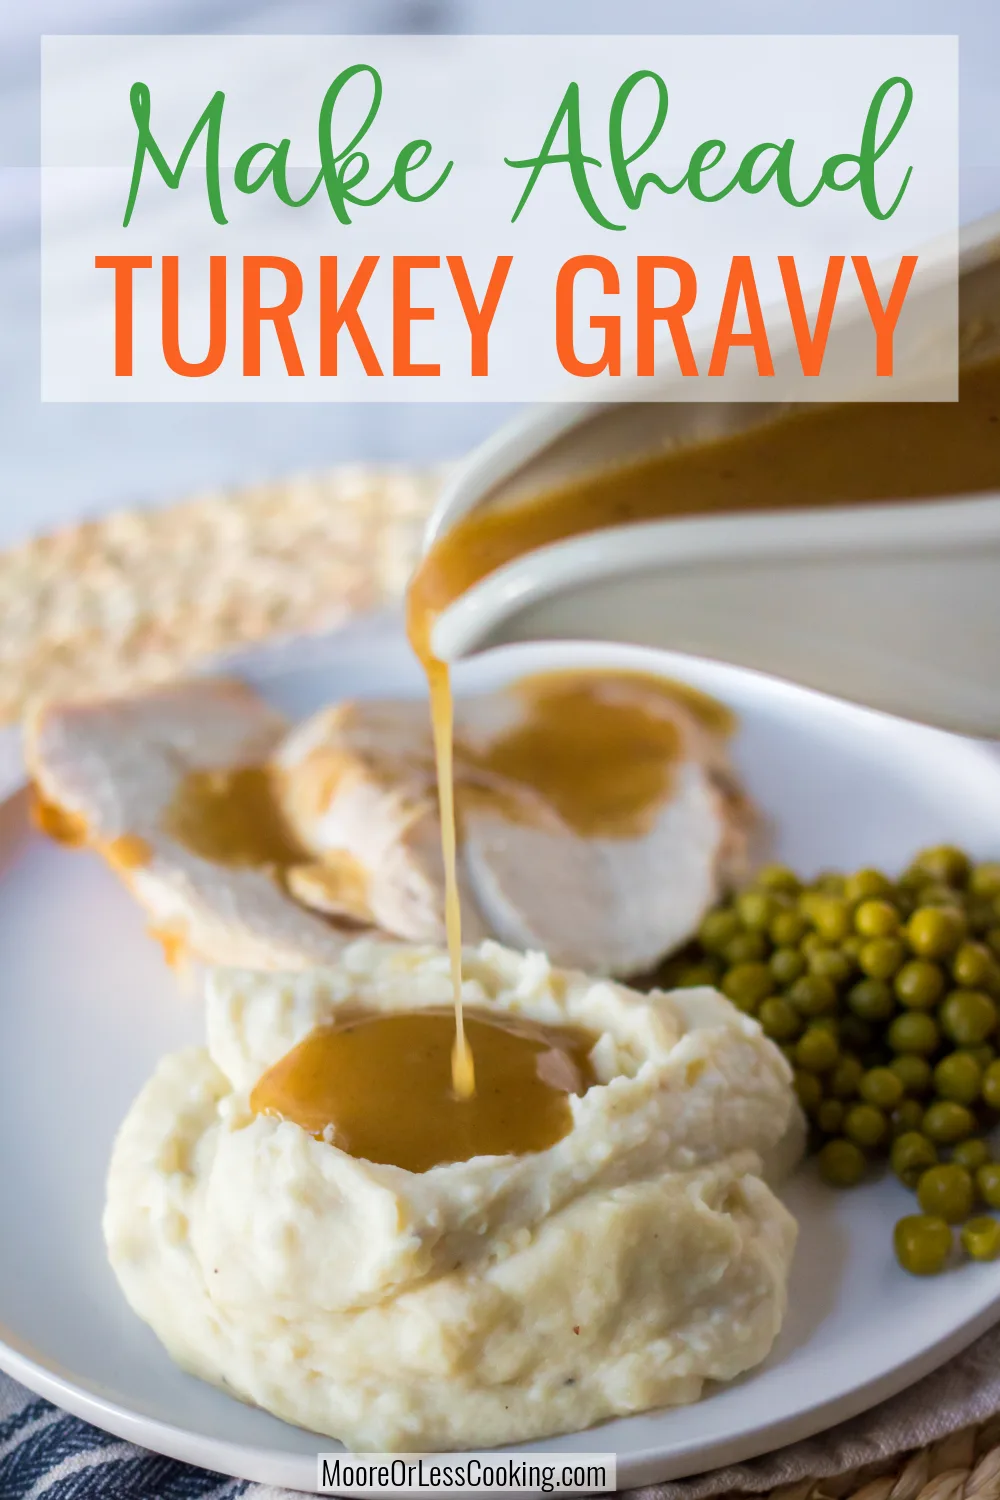 If you're wanting the most scrumptious gravy for your turkey, mashed potatoes or biscuits, you'll love this Make Ahead Turkey Gravy that delivers outrageous flavor! Have it ready and waiting to be warmed up when you need it by planning ahead with this delicious freezer-friendly recipe that's made from scratch. via @Mooreorlesscook